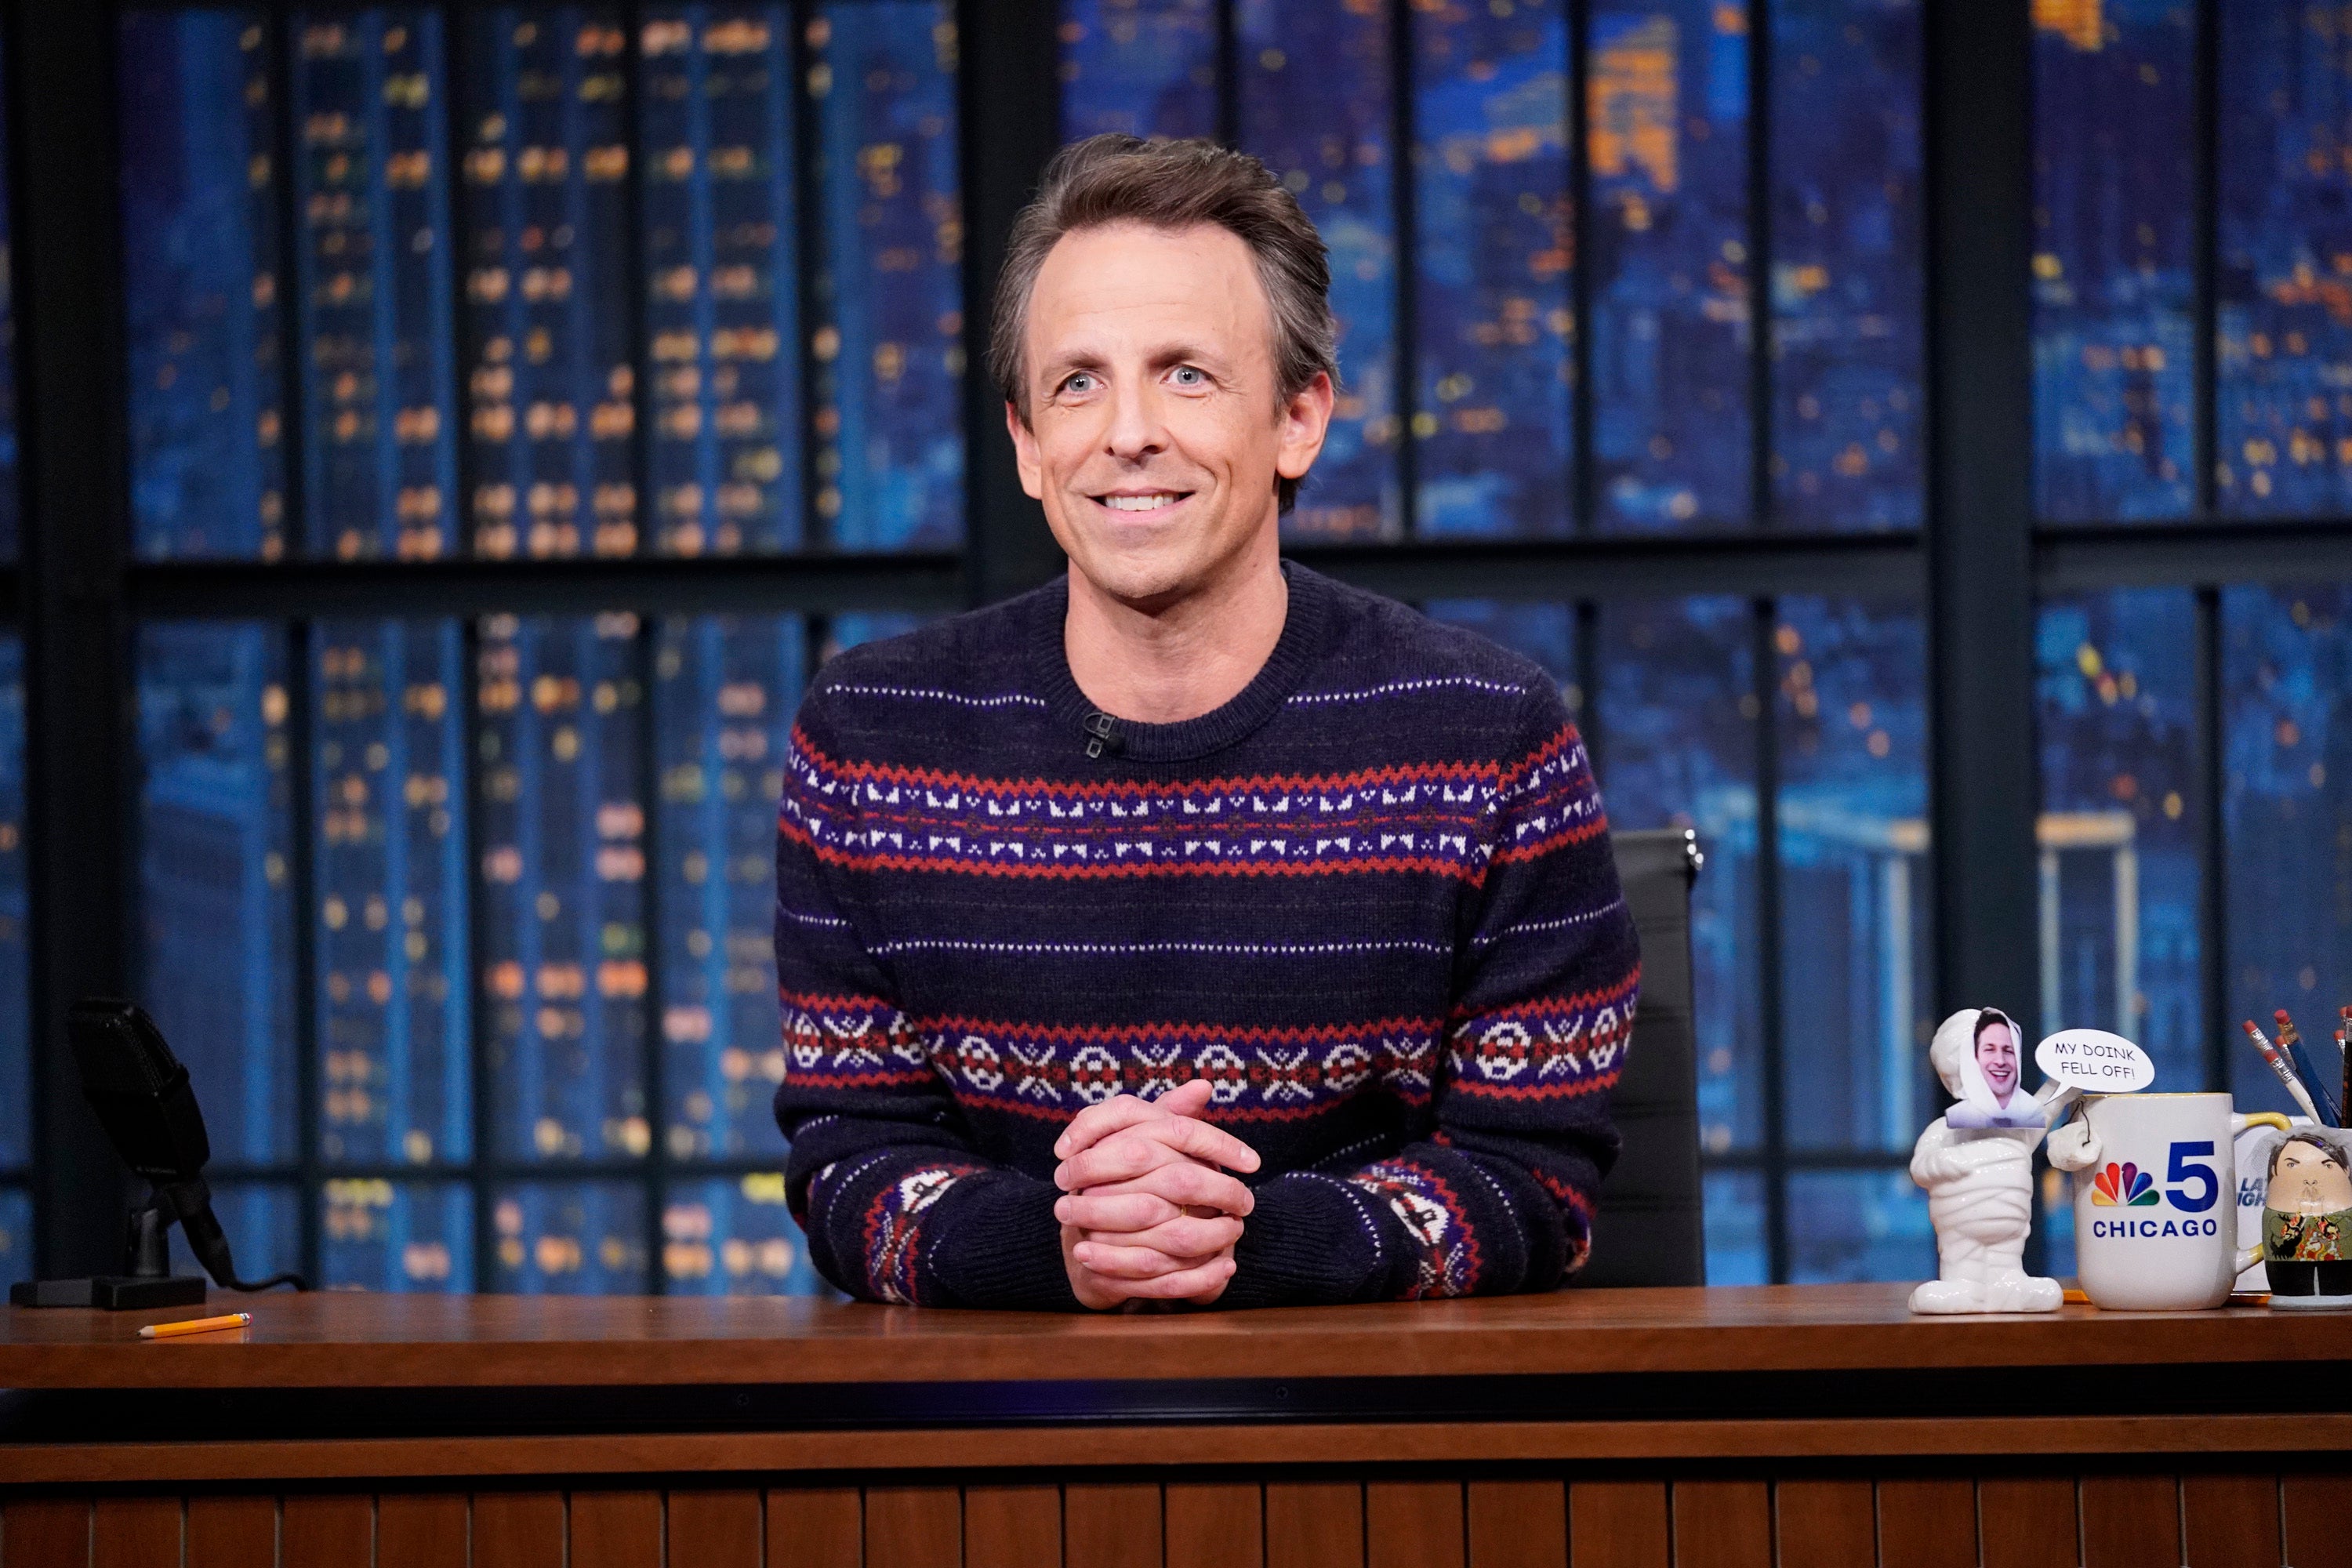 US chat show host Seth Meyers